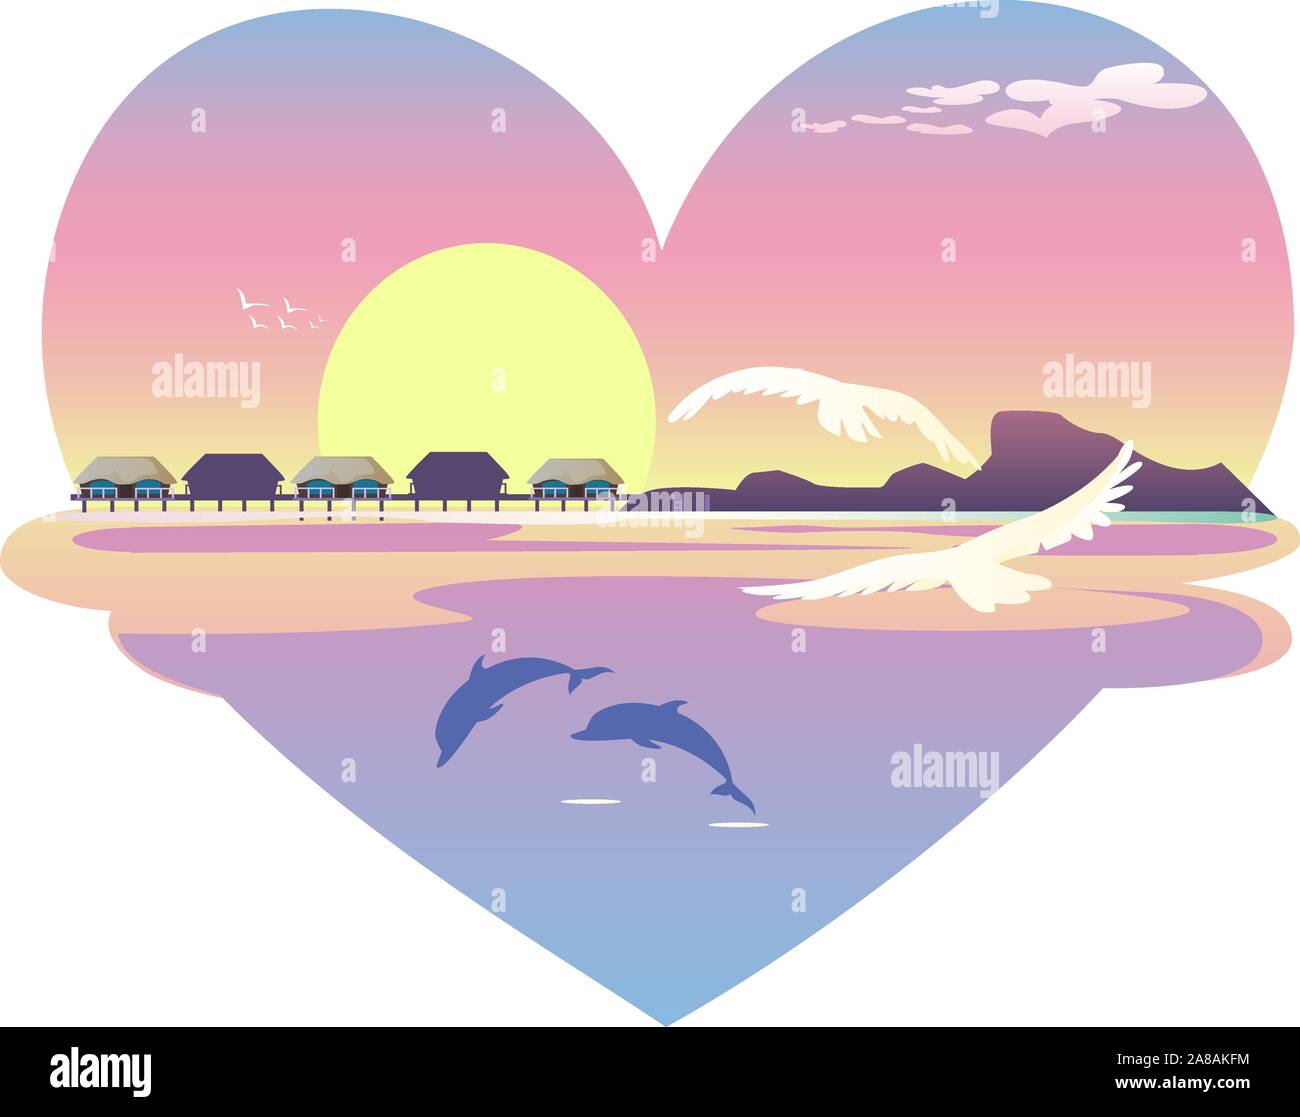 Heart beach resort landscape, with white birds and clouds, and blue dolphins. Sunset, sunrise view. Vector illustration. Stock Vector